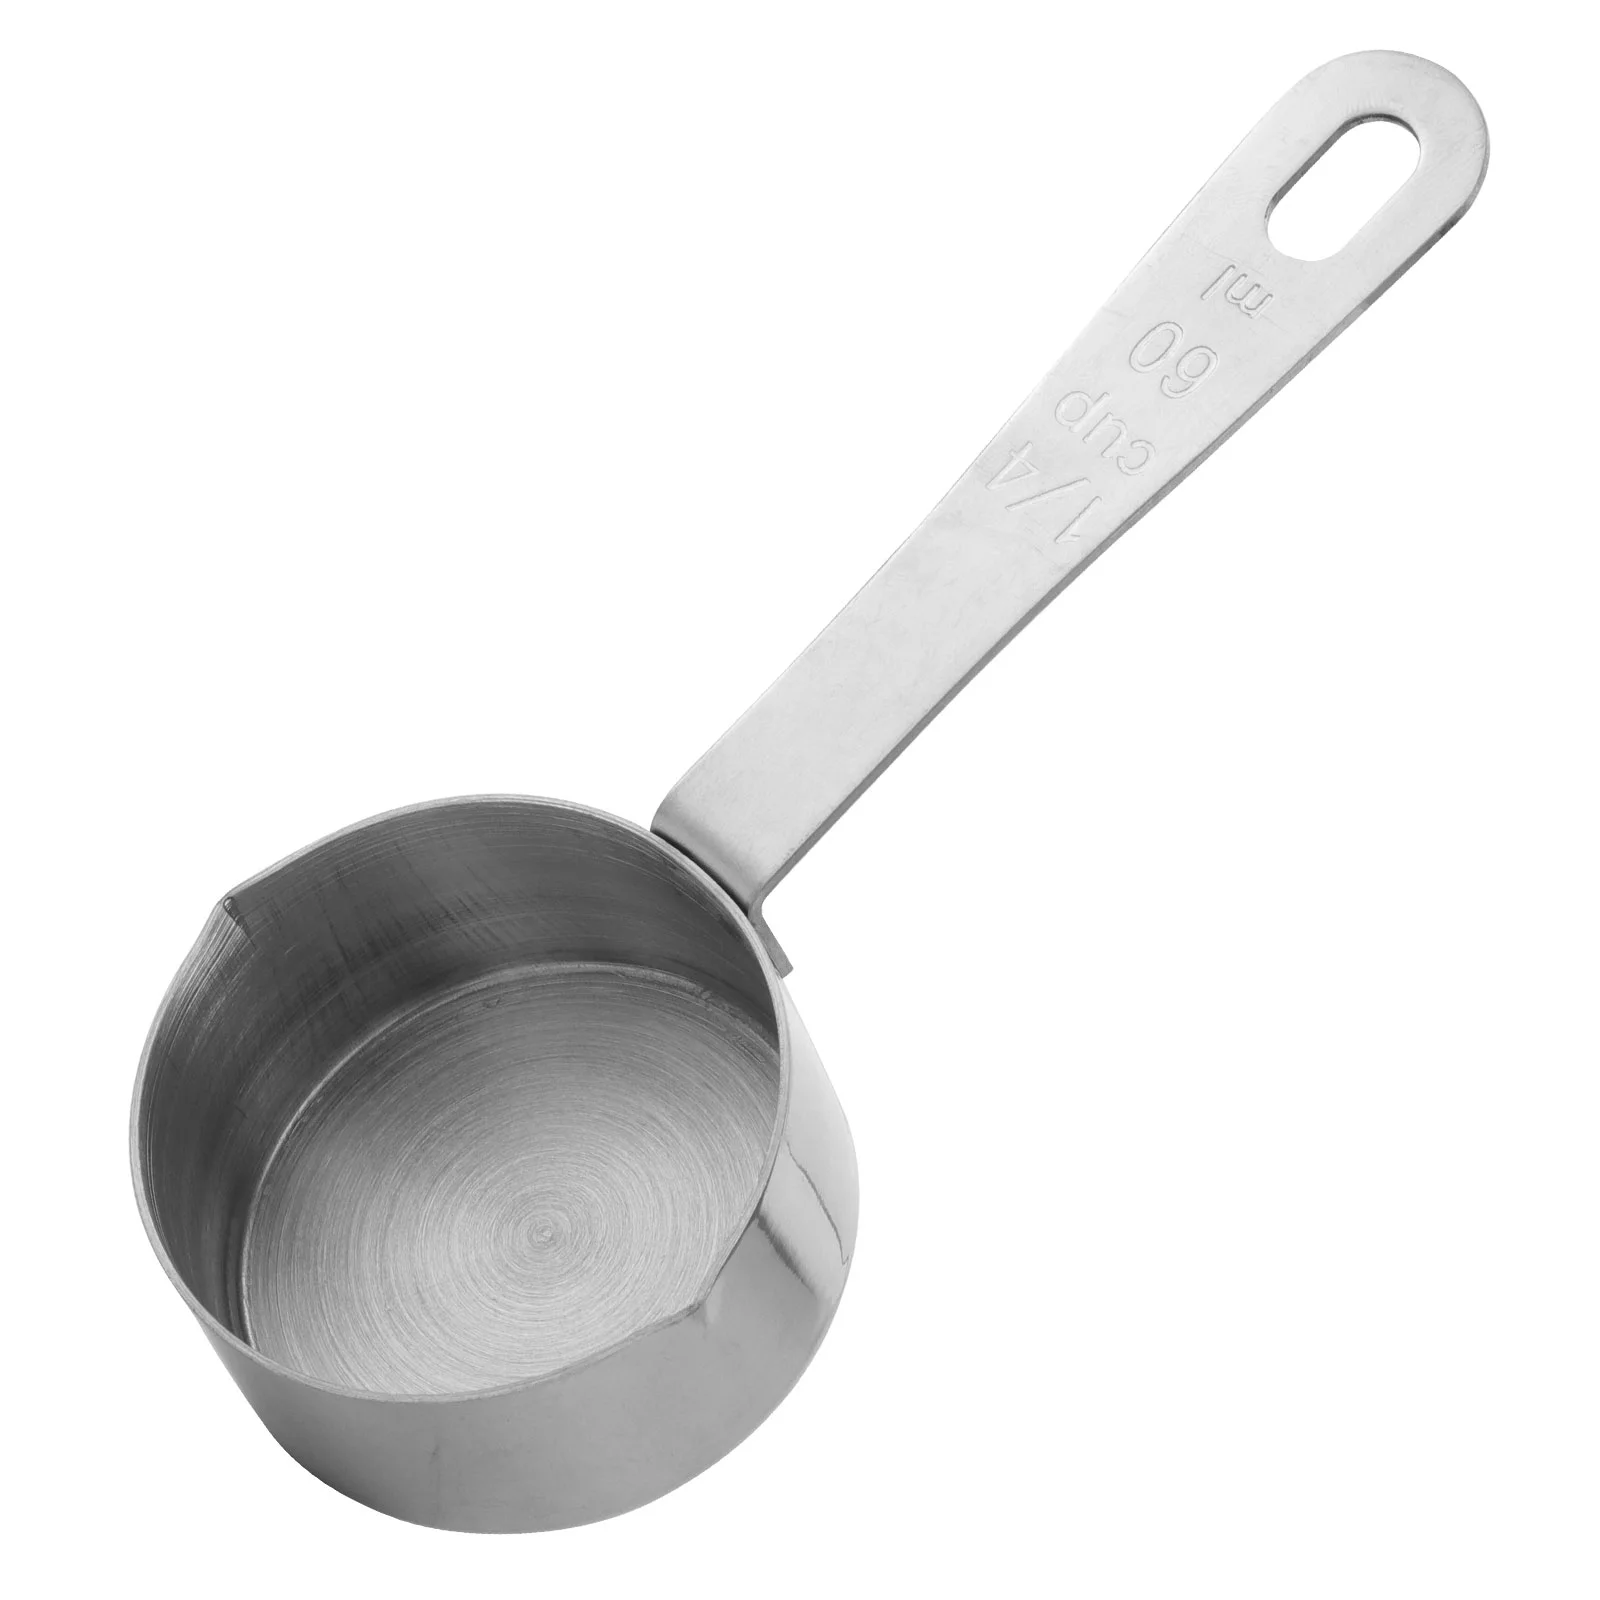 

Pot Saucepan Milk Pan Sauce Warmer Butter Mini Steel Soup Stainless Cooking Melting Measuring Coffee Bowl Cup Chocolate Pitcher